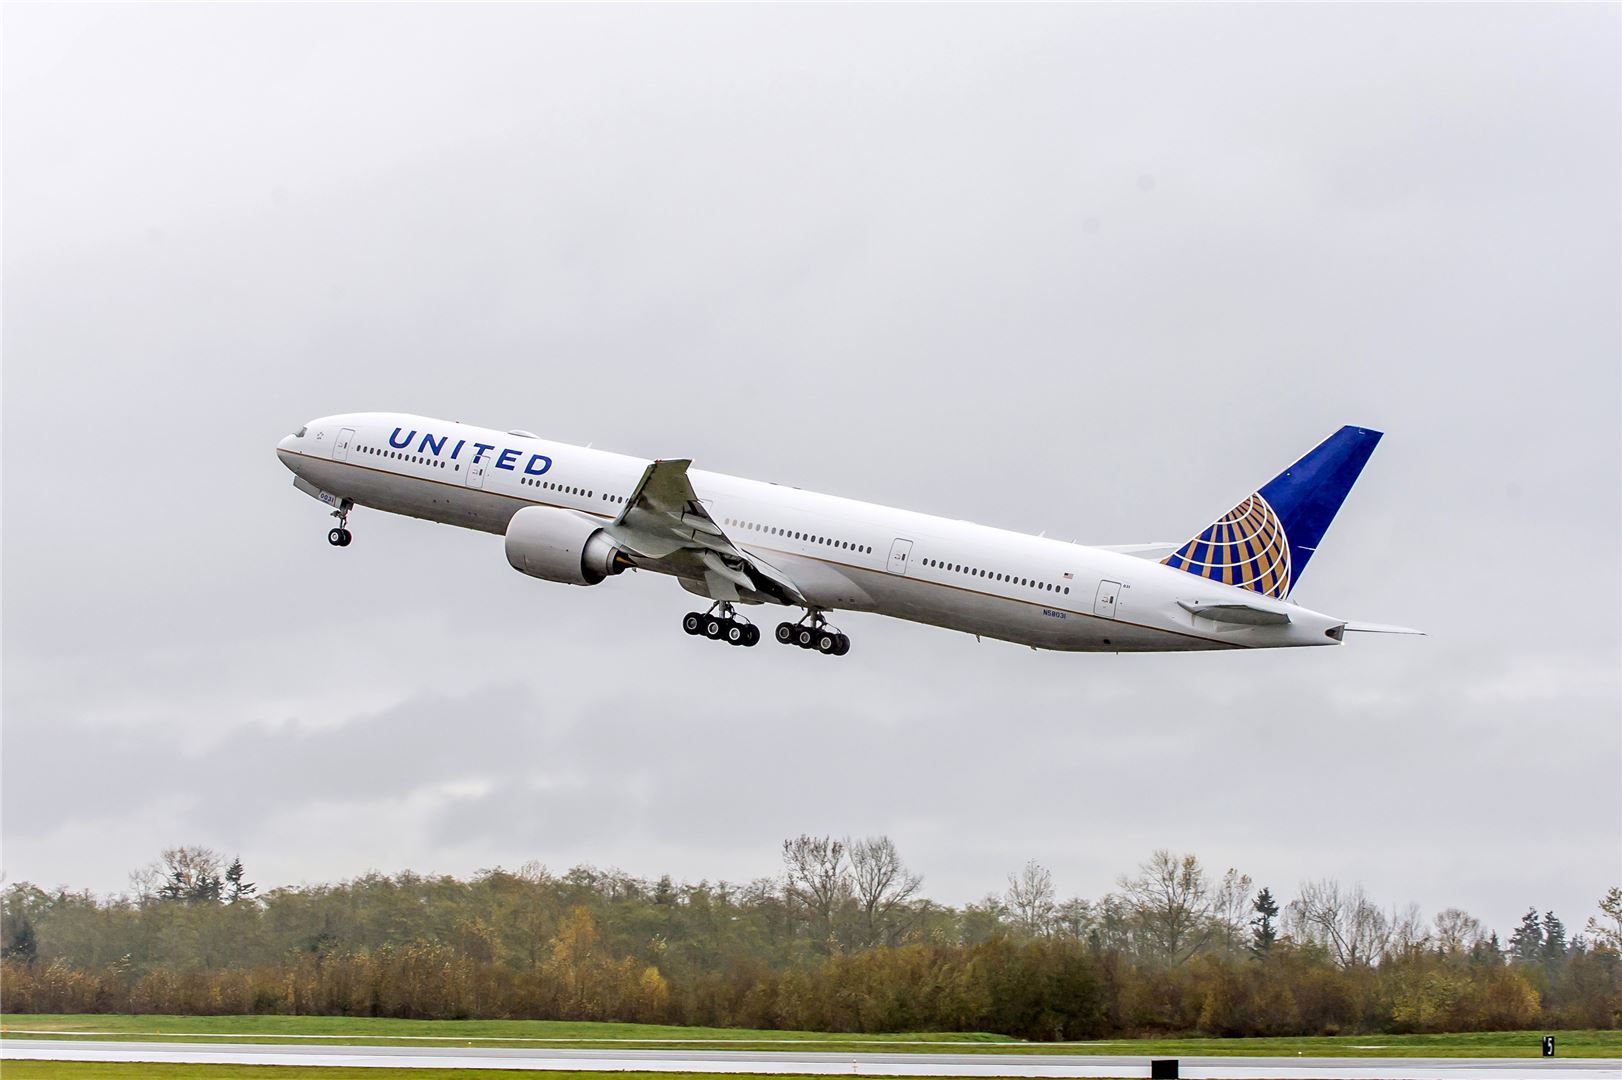 United Airlines Donated $1 Million to Government Shutdown Response Fund